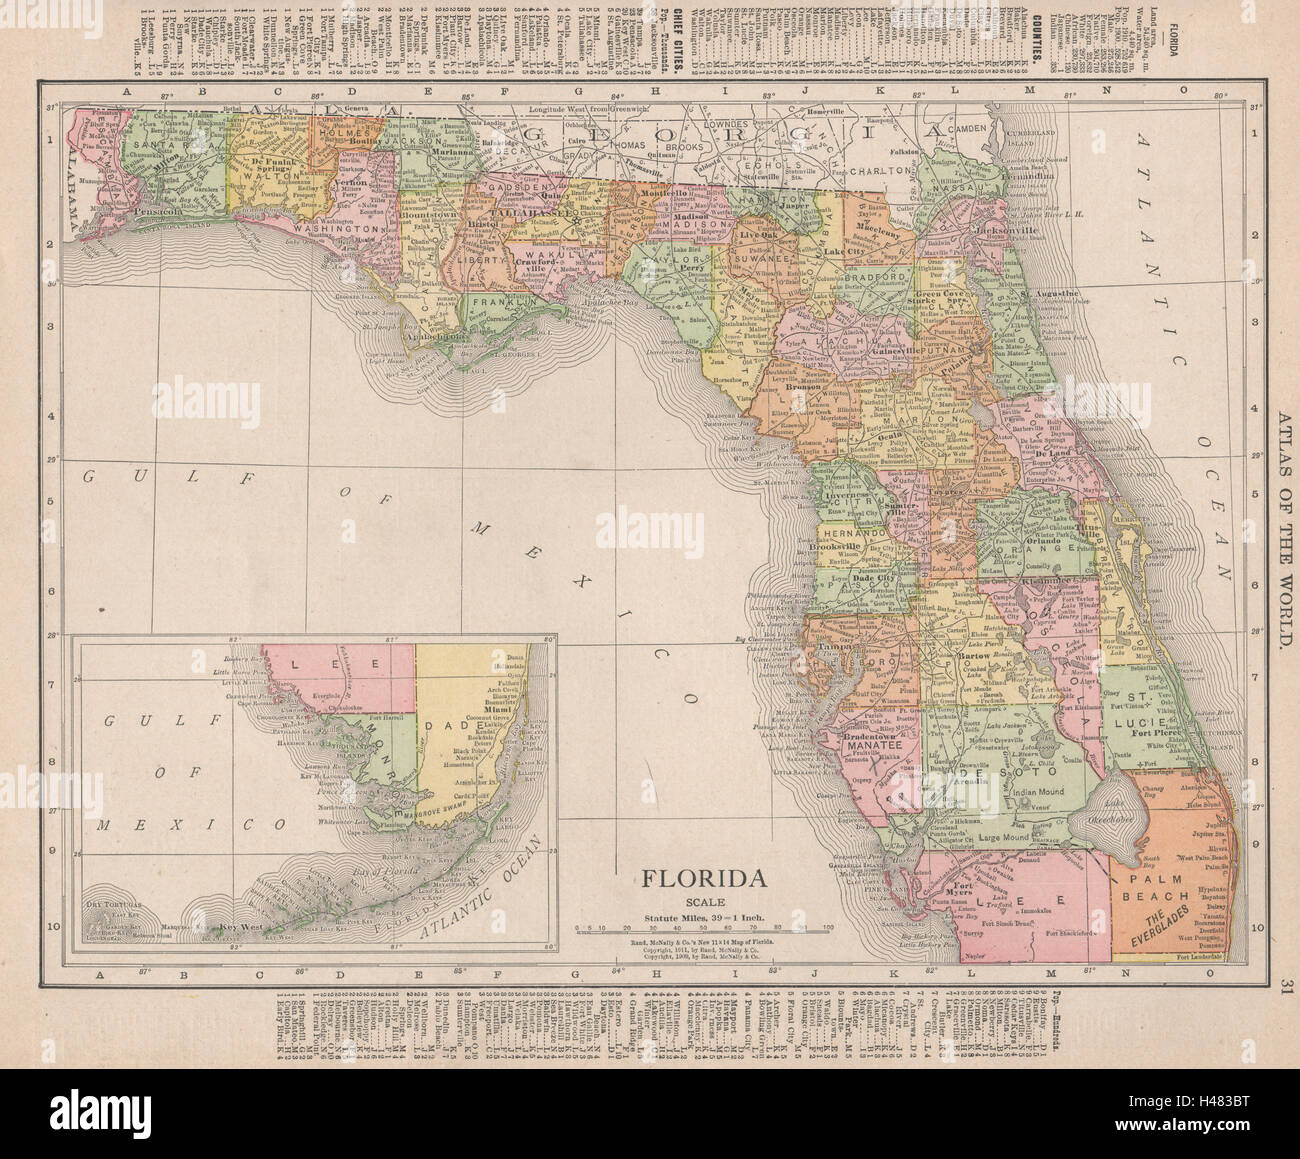 Florida state map showing counties. RAND MCNALLY 1912 old antique chart Stock Photo